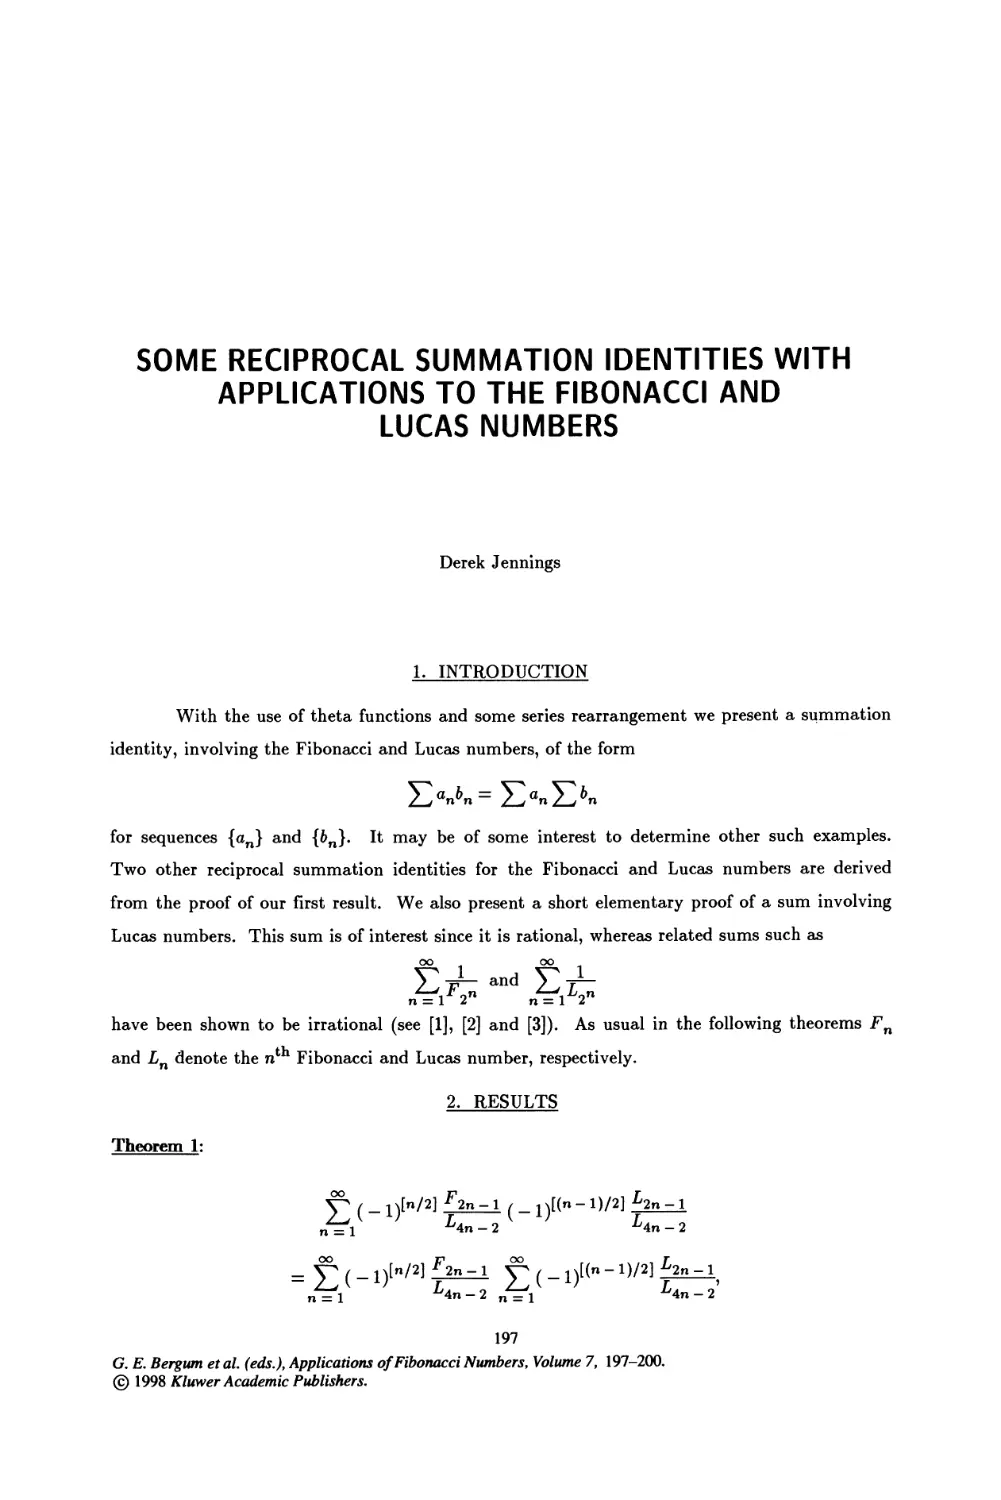 23. Some Reciprocal Summation Identities with Applications to the Fibonacci and Lucas Numbers